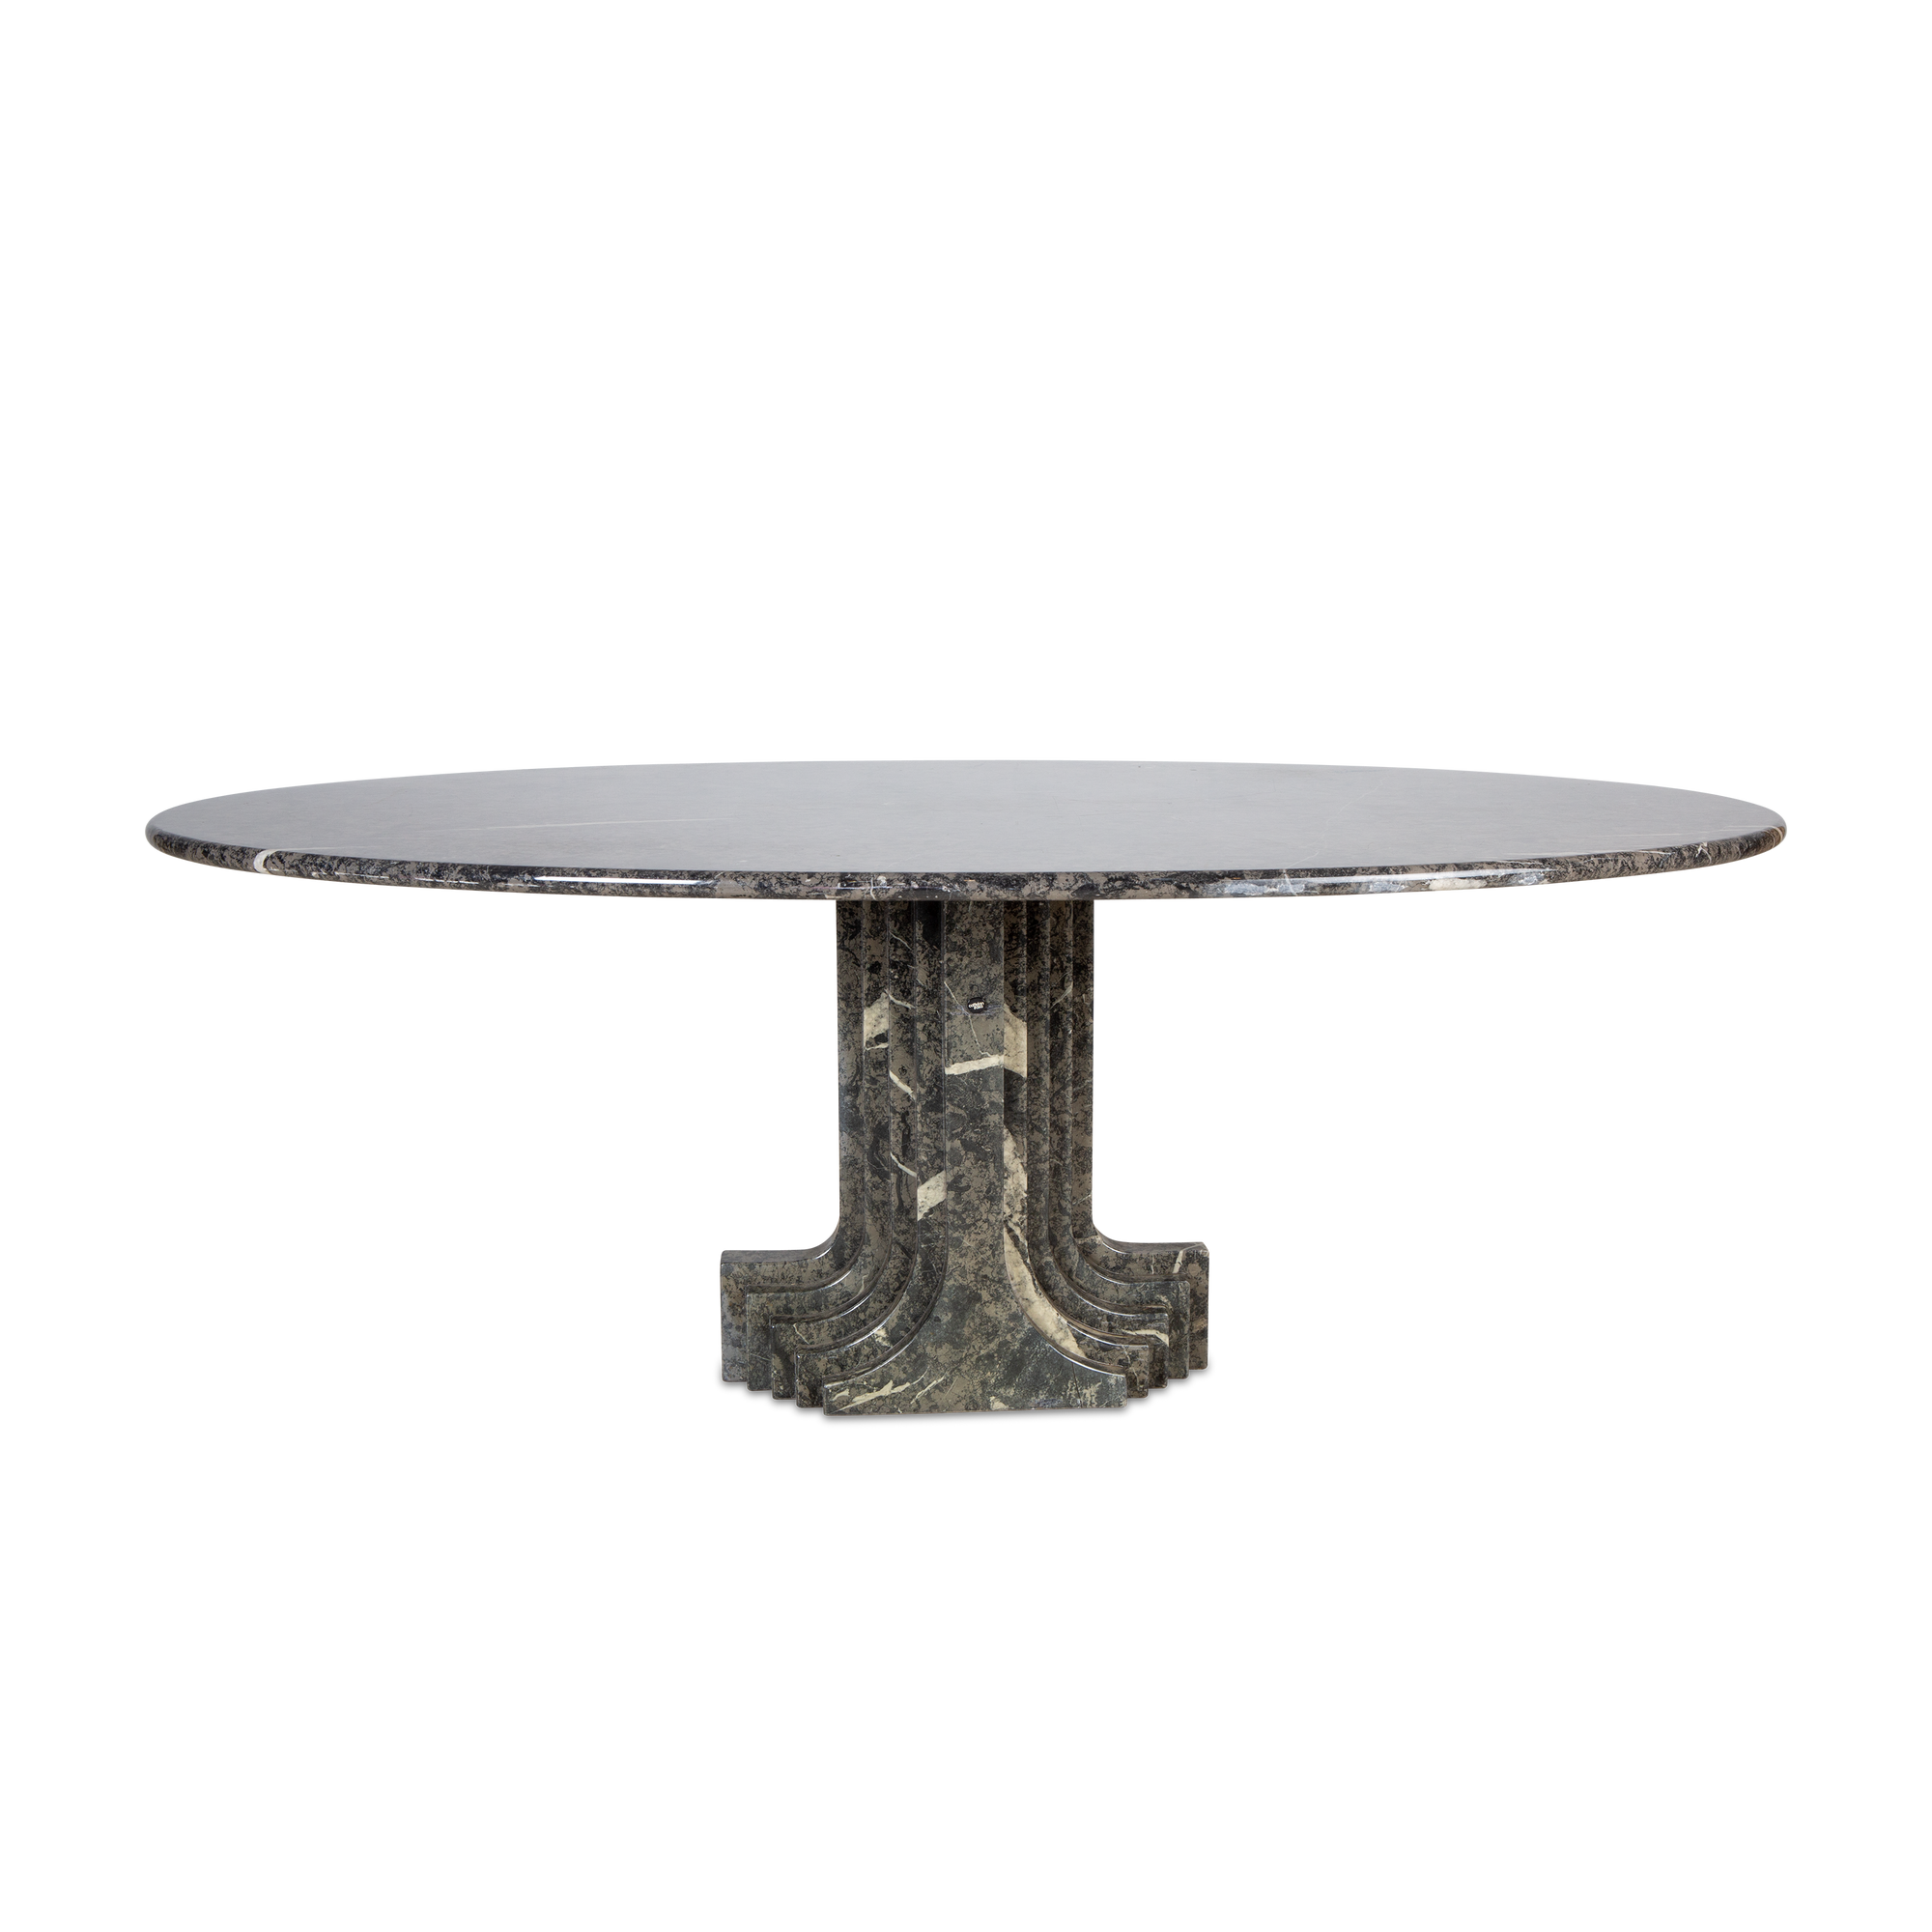 Designed in 1971 by Carlo Scarpa, the Samo Dining Table is the Italian architect and designer's modern interpretation of Classical architecture.